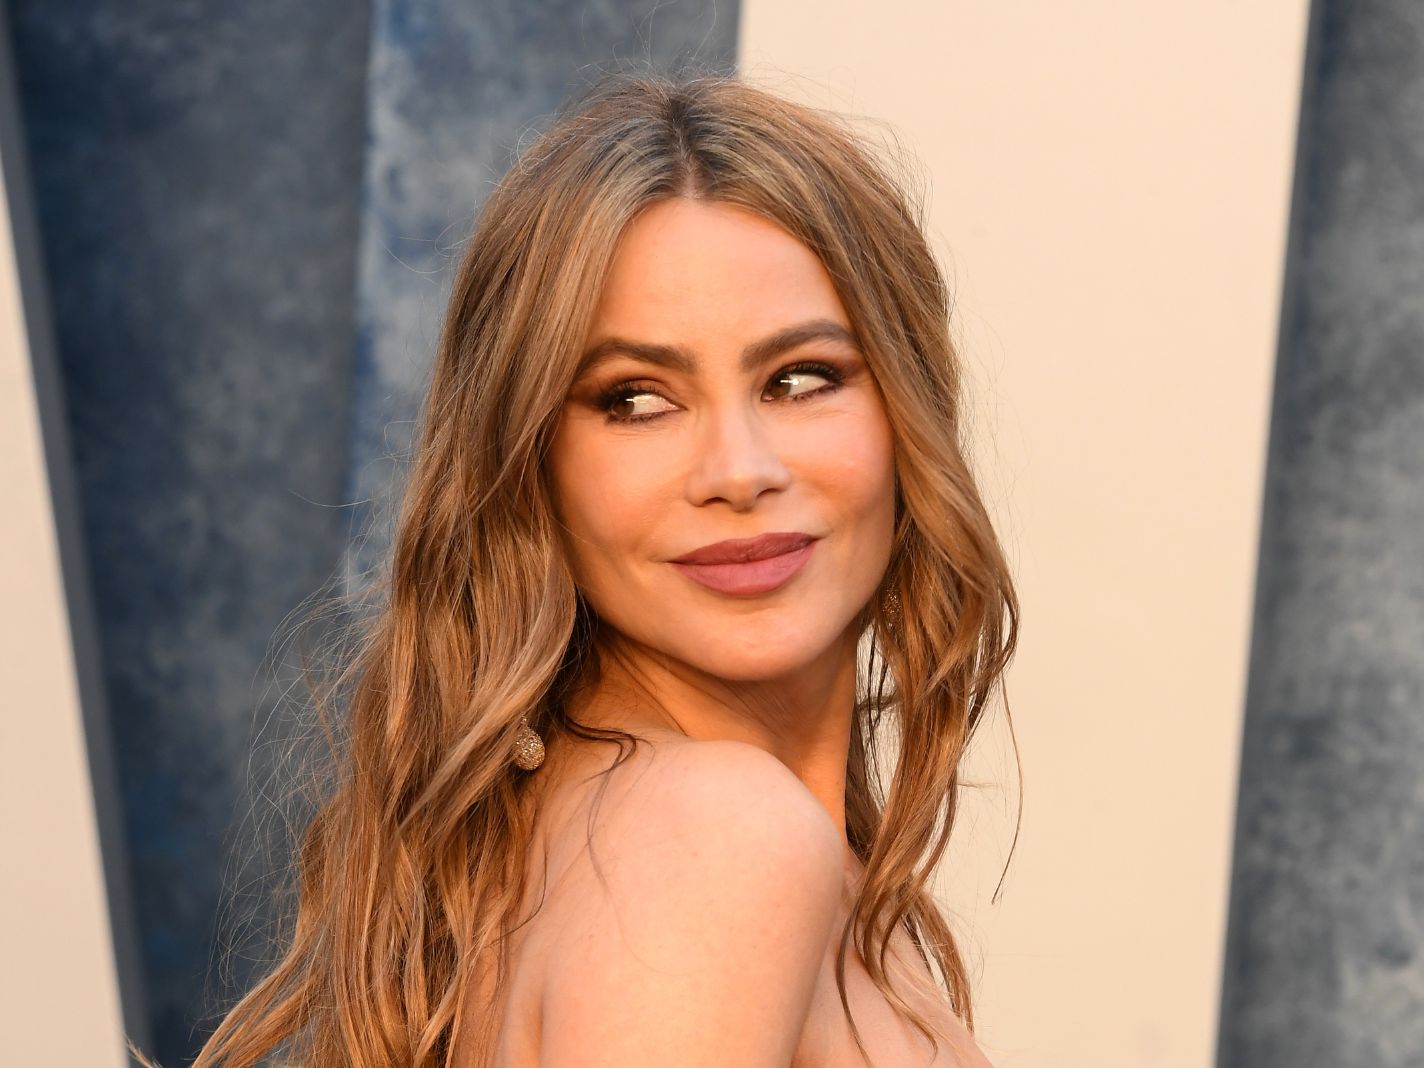 Sofia Vergara Drops Beauty Line with Sun Care Focus — See Products